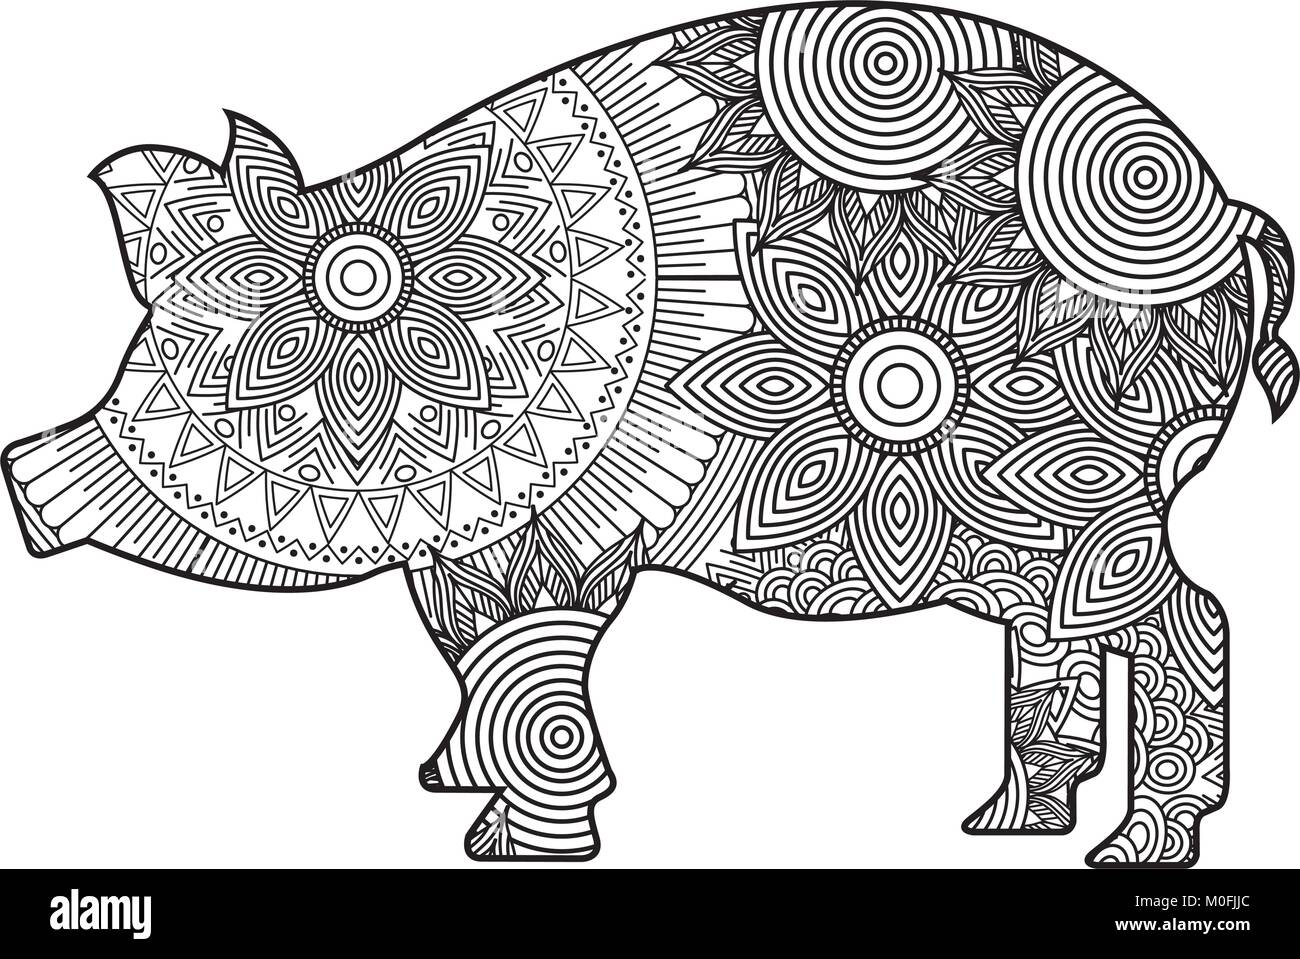 hand drawn for adult coloring pages with pig zentangle monochrome sketch Stock Vector